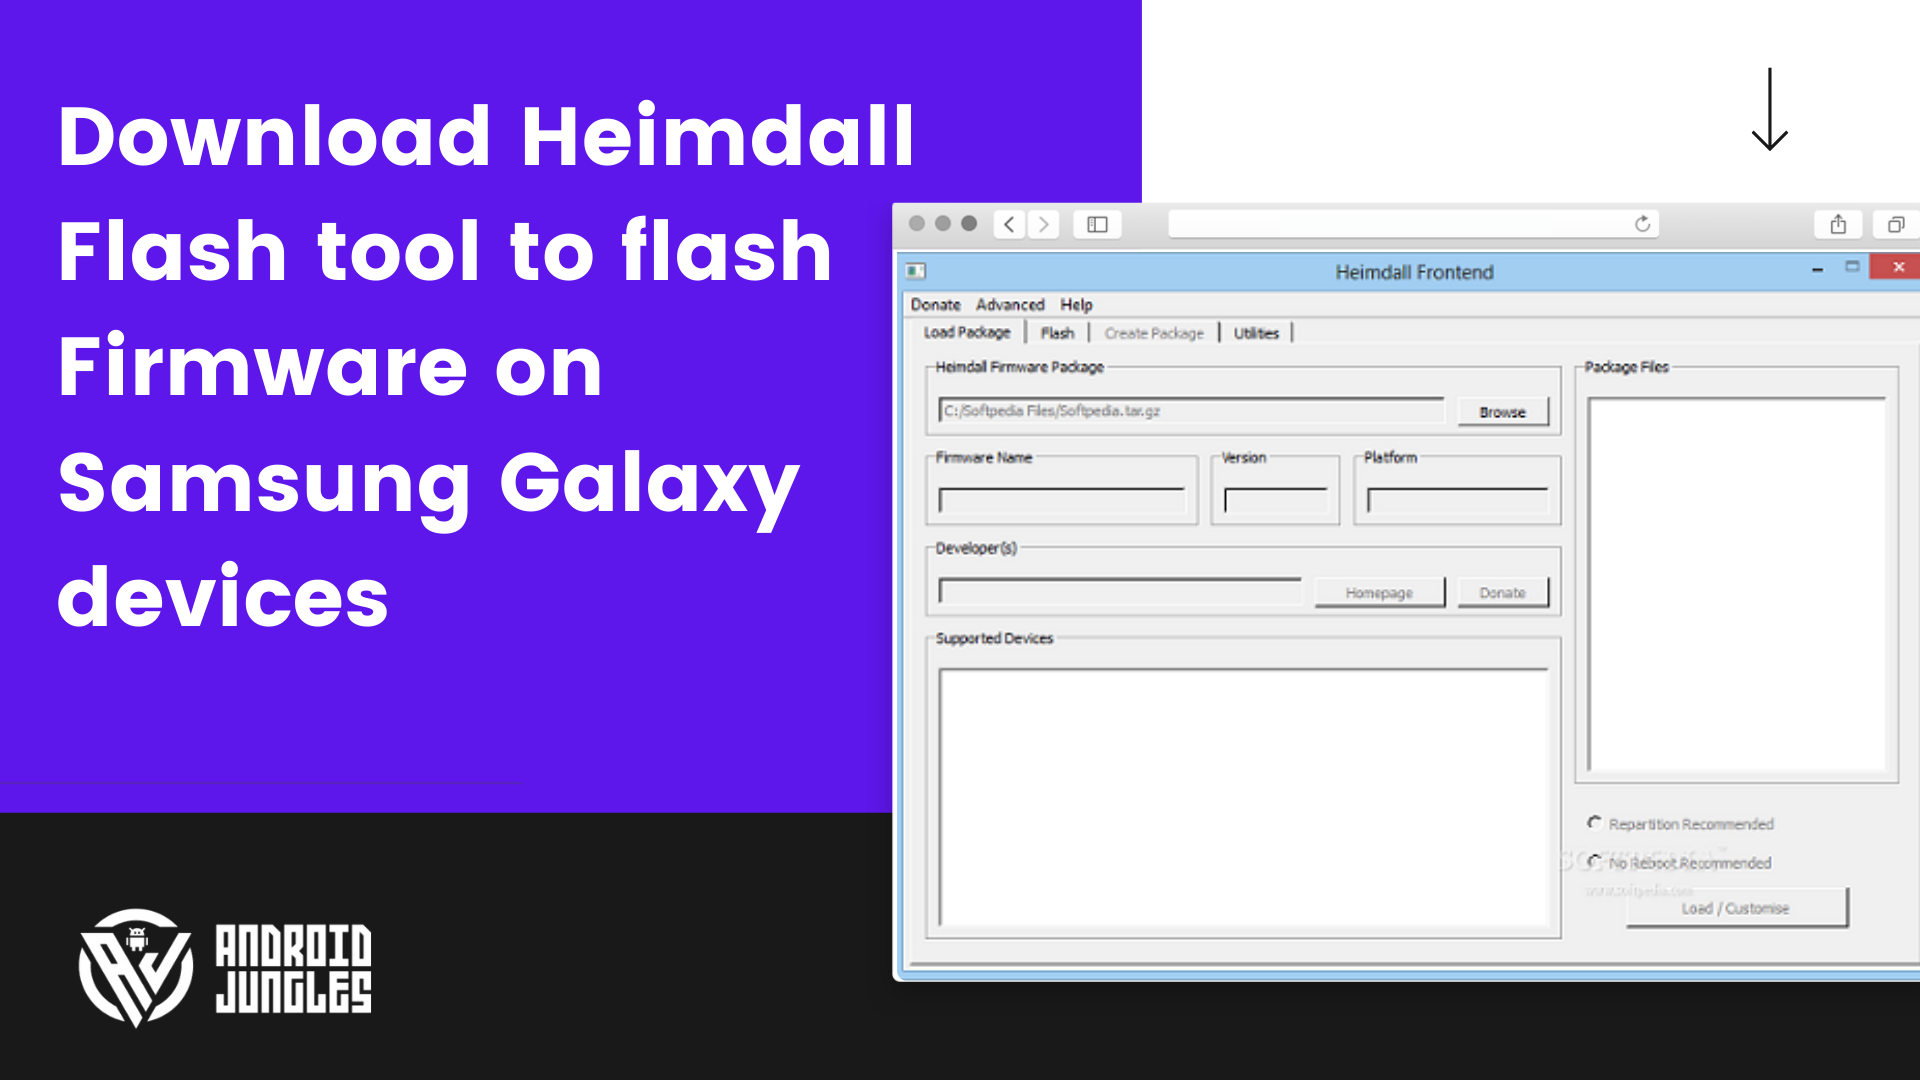 Download Heimdall Flash tool to flash Firmware on Samsung Galaxy devices